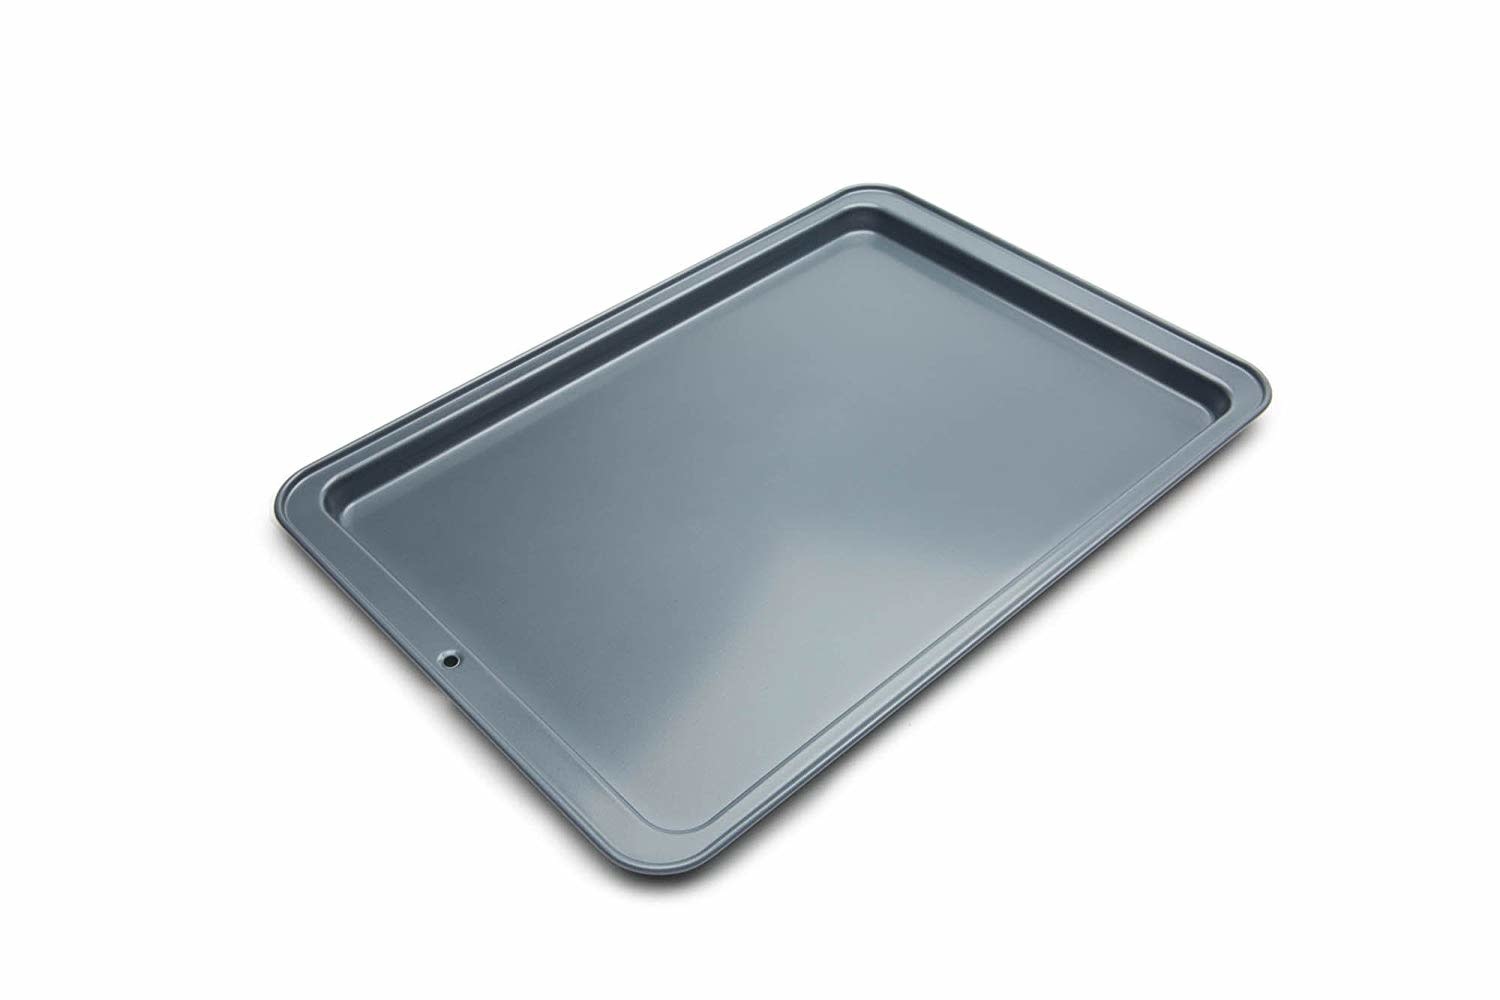  Wilton Recipe Right Cookie/Jelly Roll Pan, 17-1/4 by 11-1/2-Inch:  Baking Sheets: Home & Kitchen